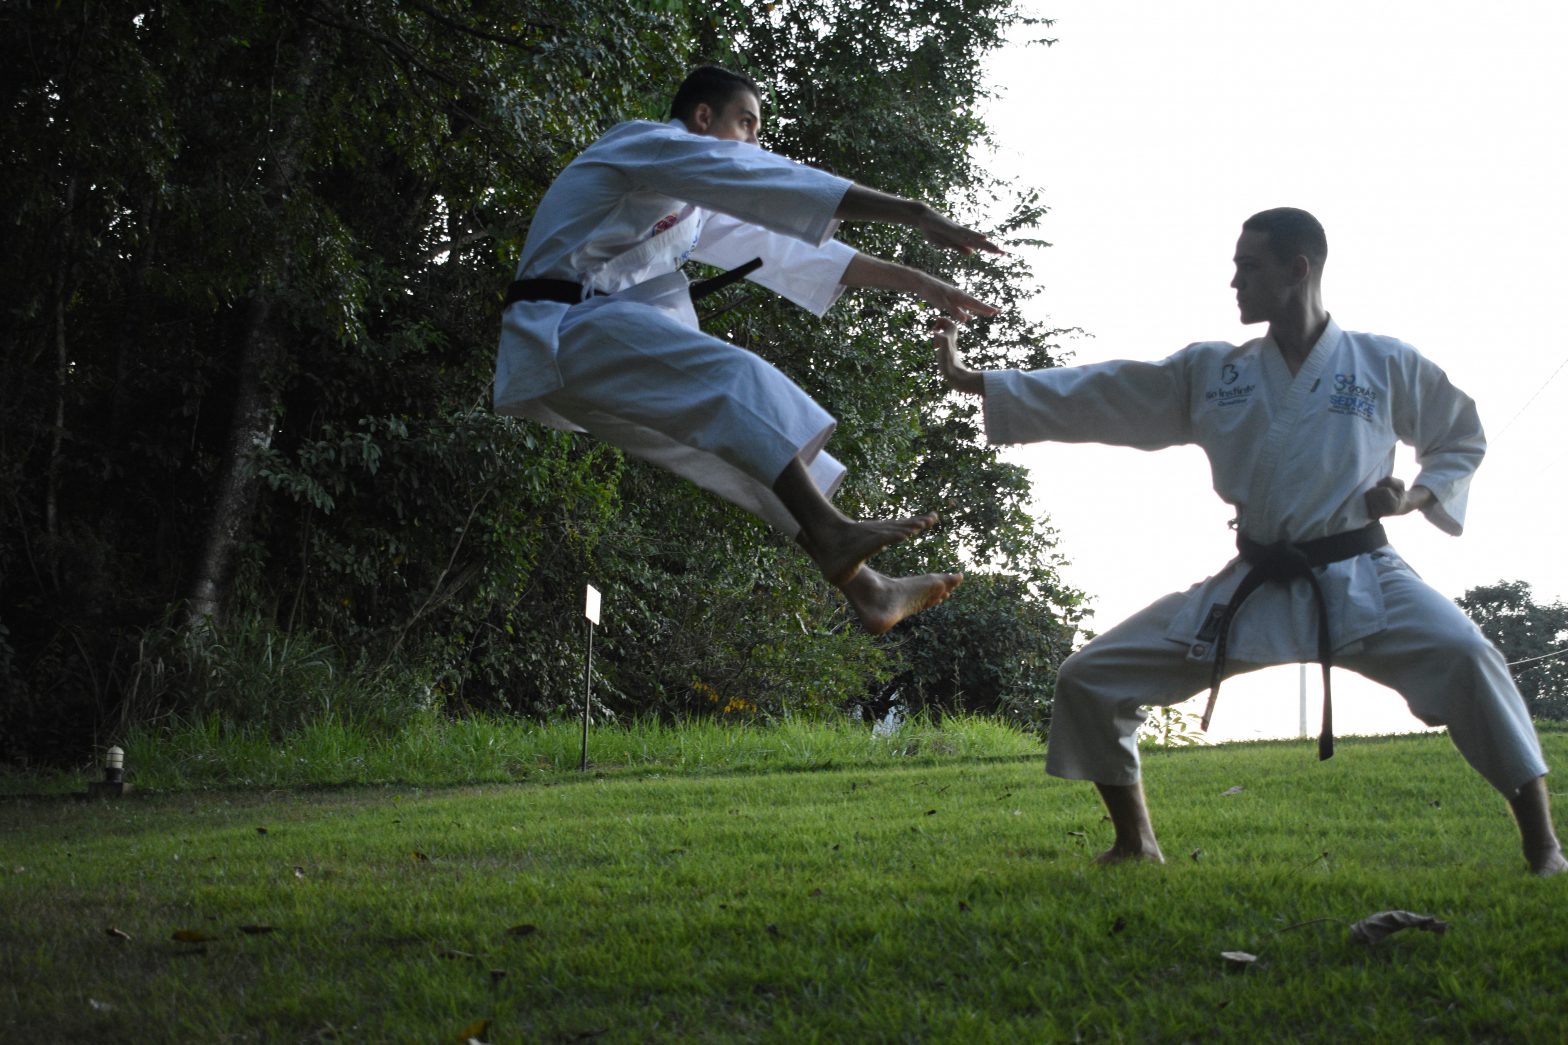 Kung-Fu - the art of mastering anything - like sales performance